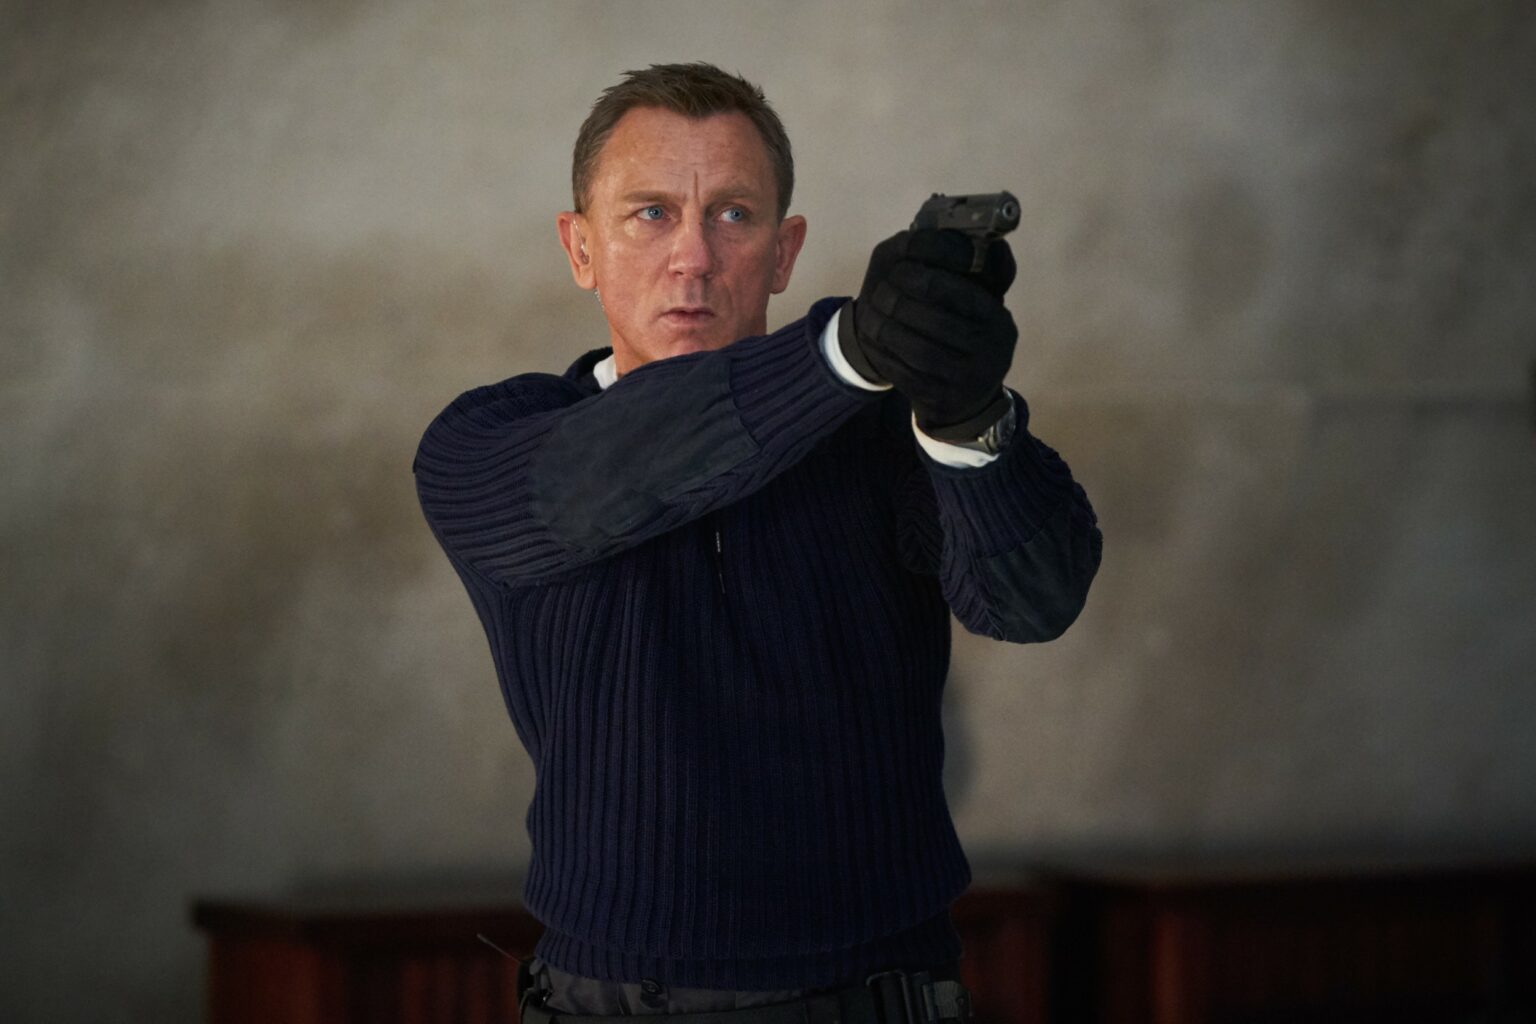 Does Apple TV+ have James Bond film 'No Time to Die' in its sights?